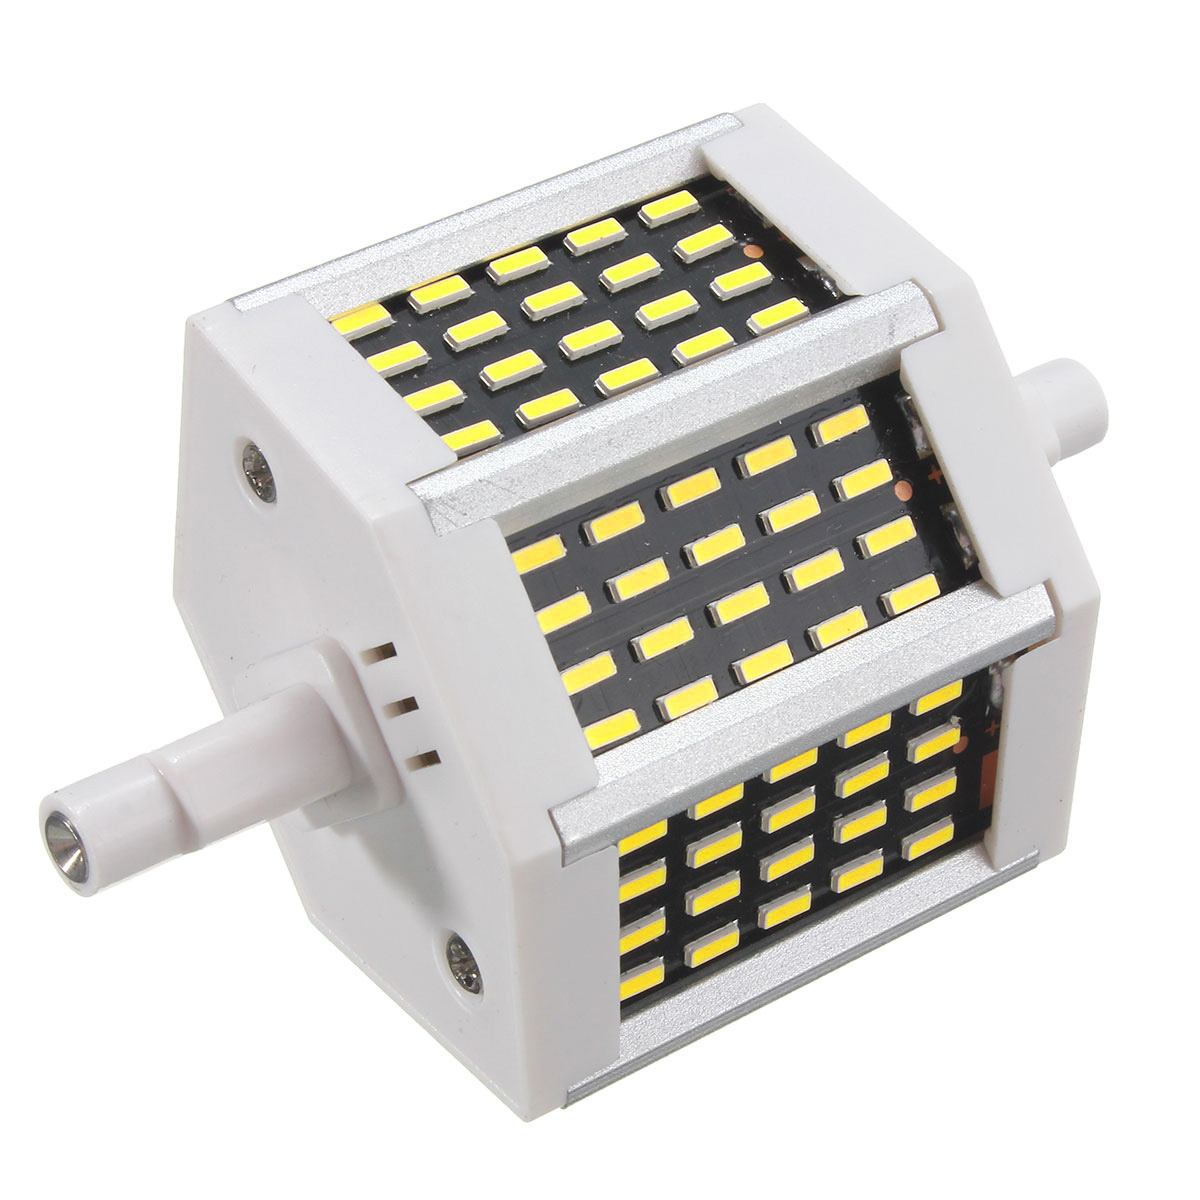 Dimmable-R7S-78mm-8W-60-SMD-4014-LED-Black-Plate-Warm-White-White-Lamp-Light-Bulb-AC220VAC110V-1051521-7